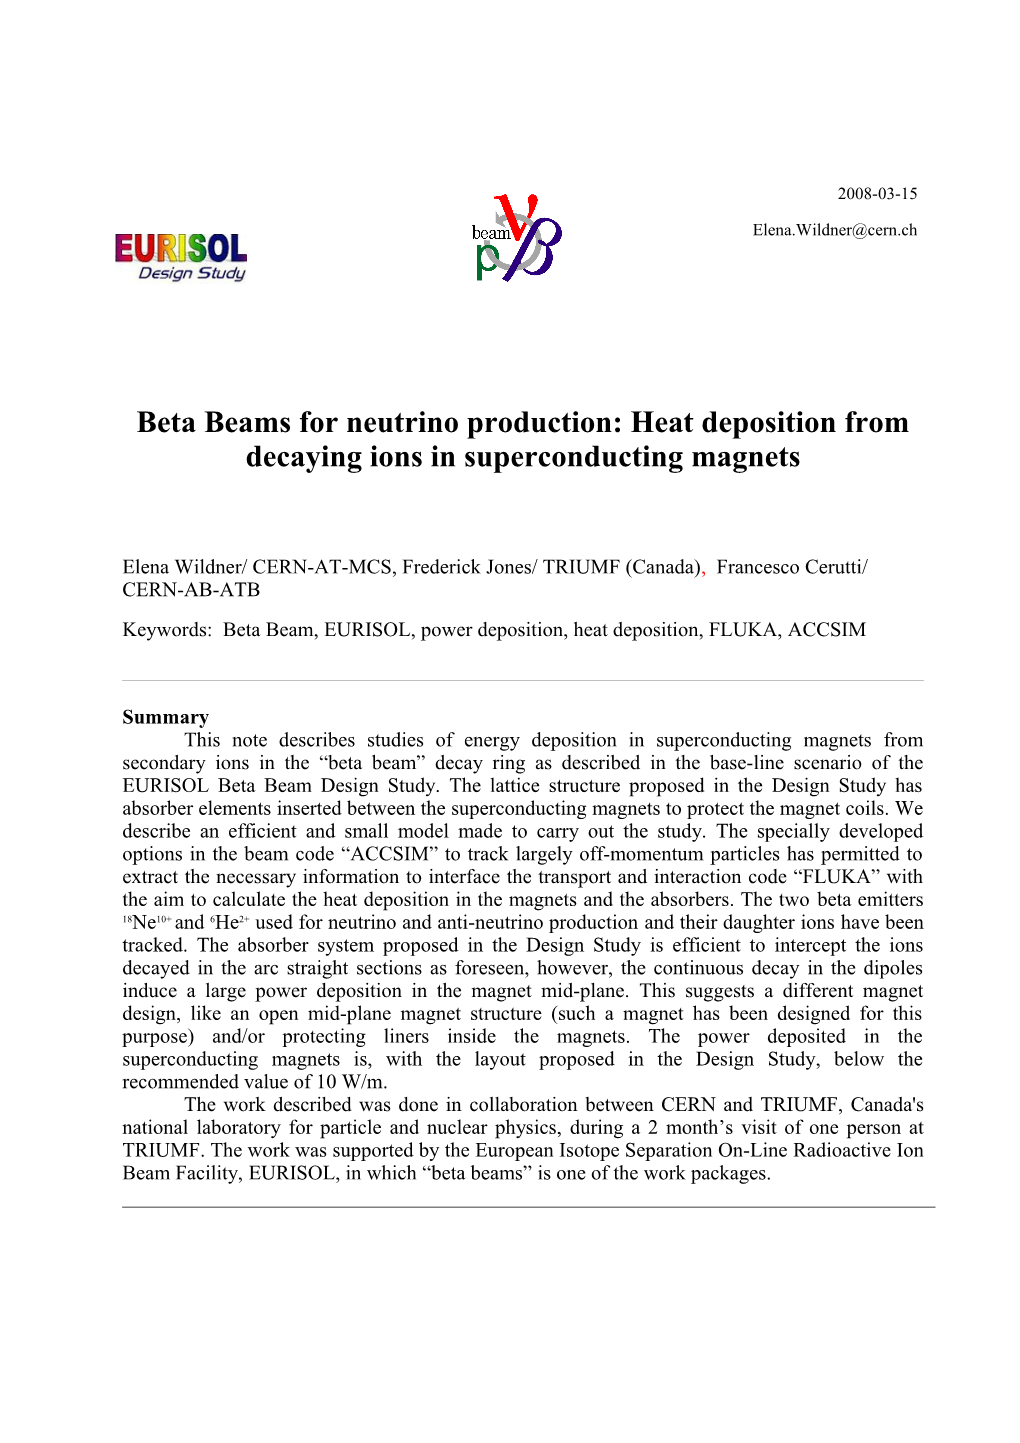 Beta Beams for Neutrino Production: Heat Deposition from Decaying Ions in Superconducting